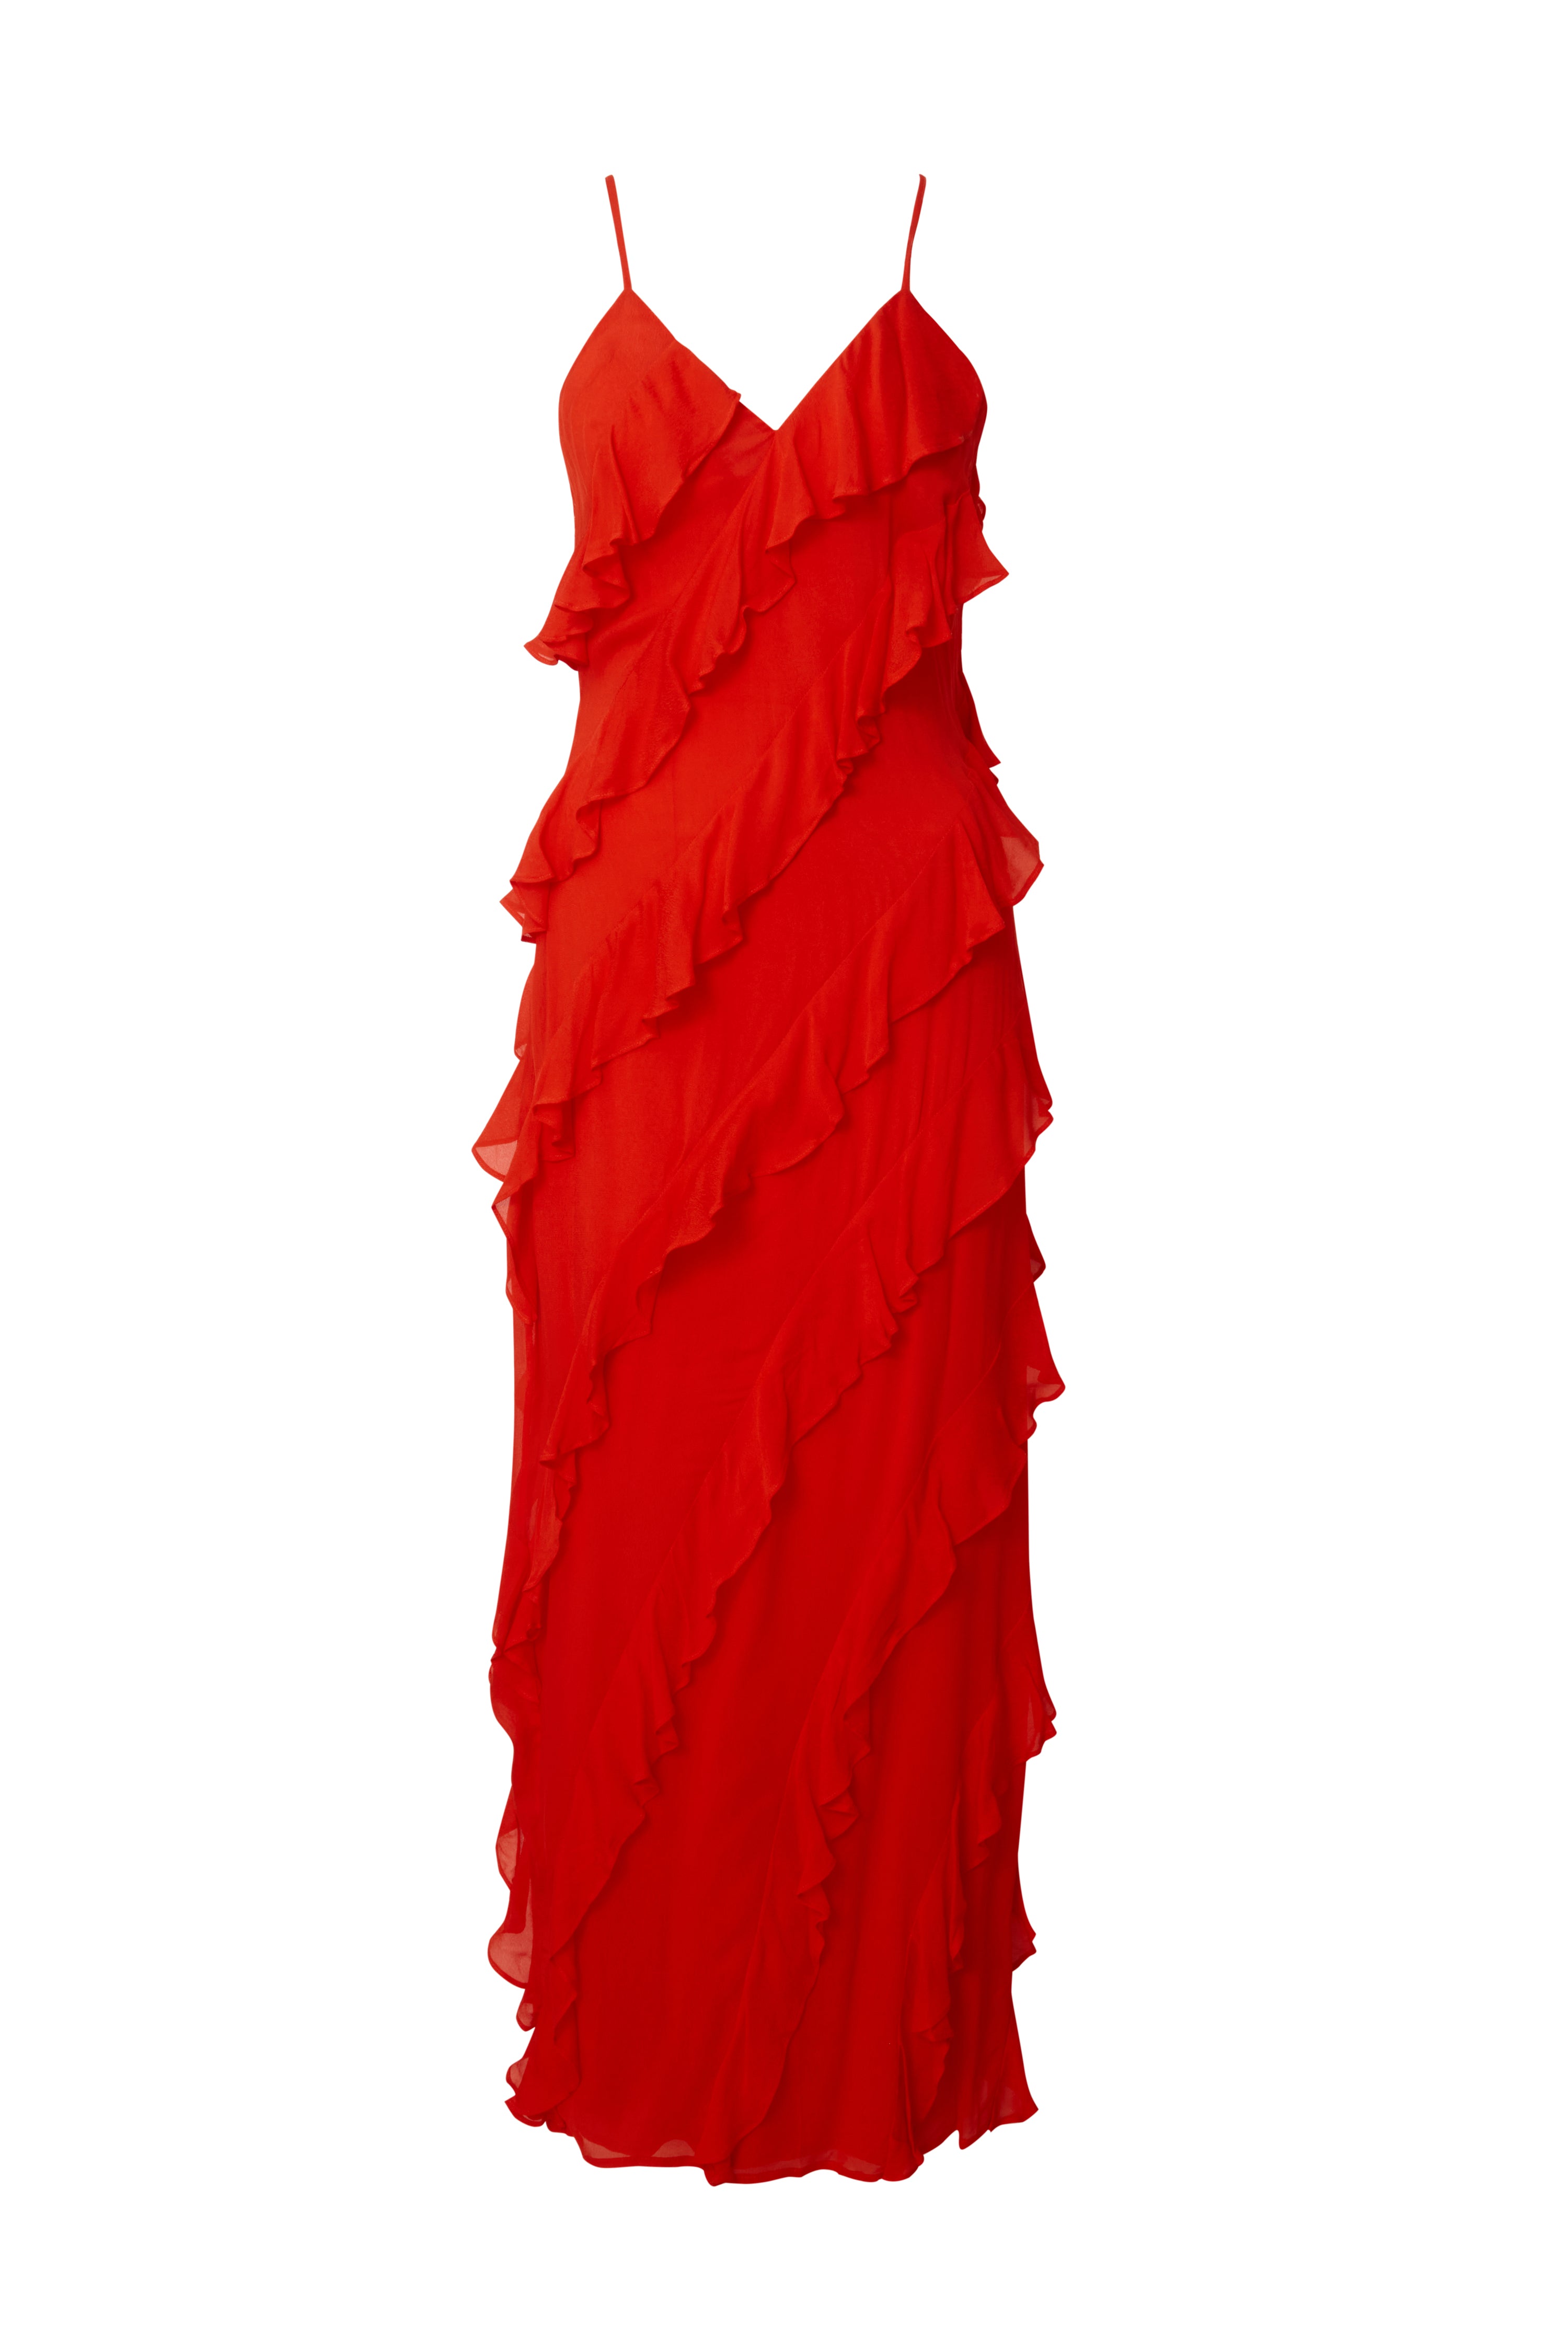 Cecily Ruffle-Trimmed Maxi Dress - Summer Red